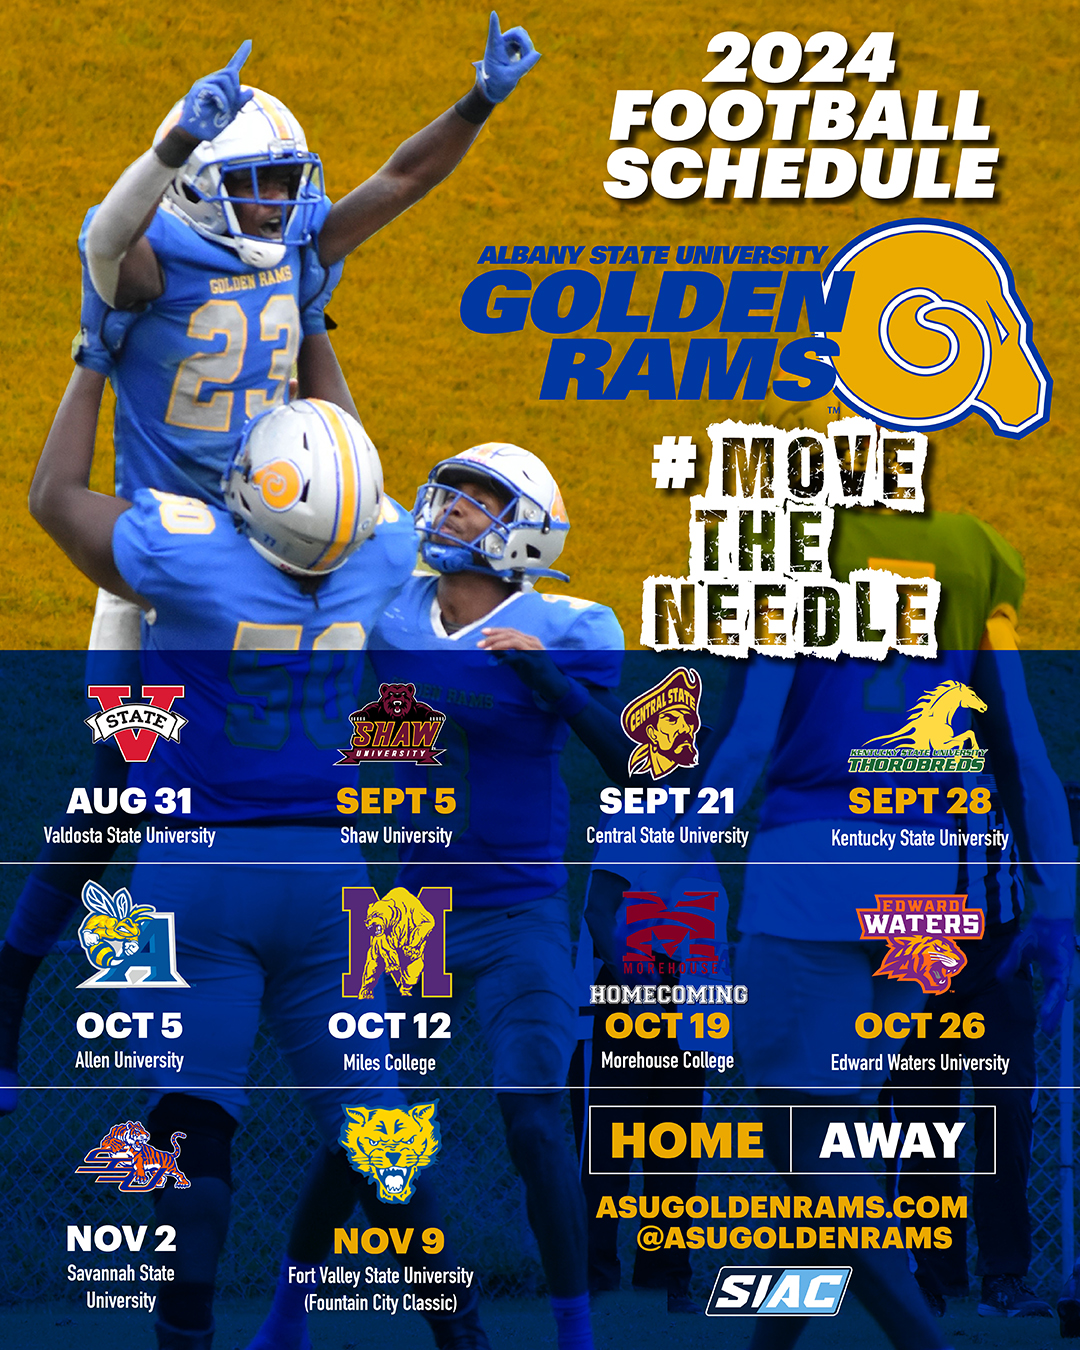 Albany State University Releases 2024 Date and Football Schedule